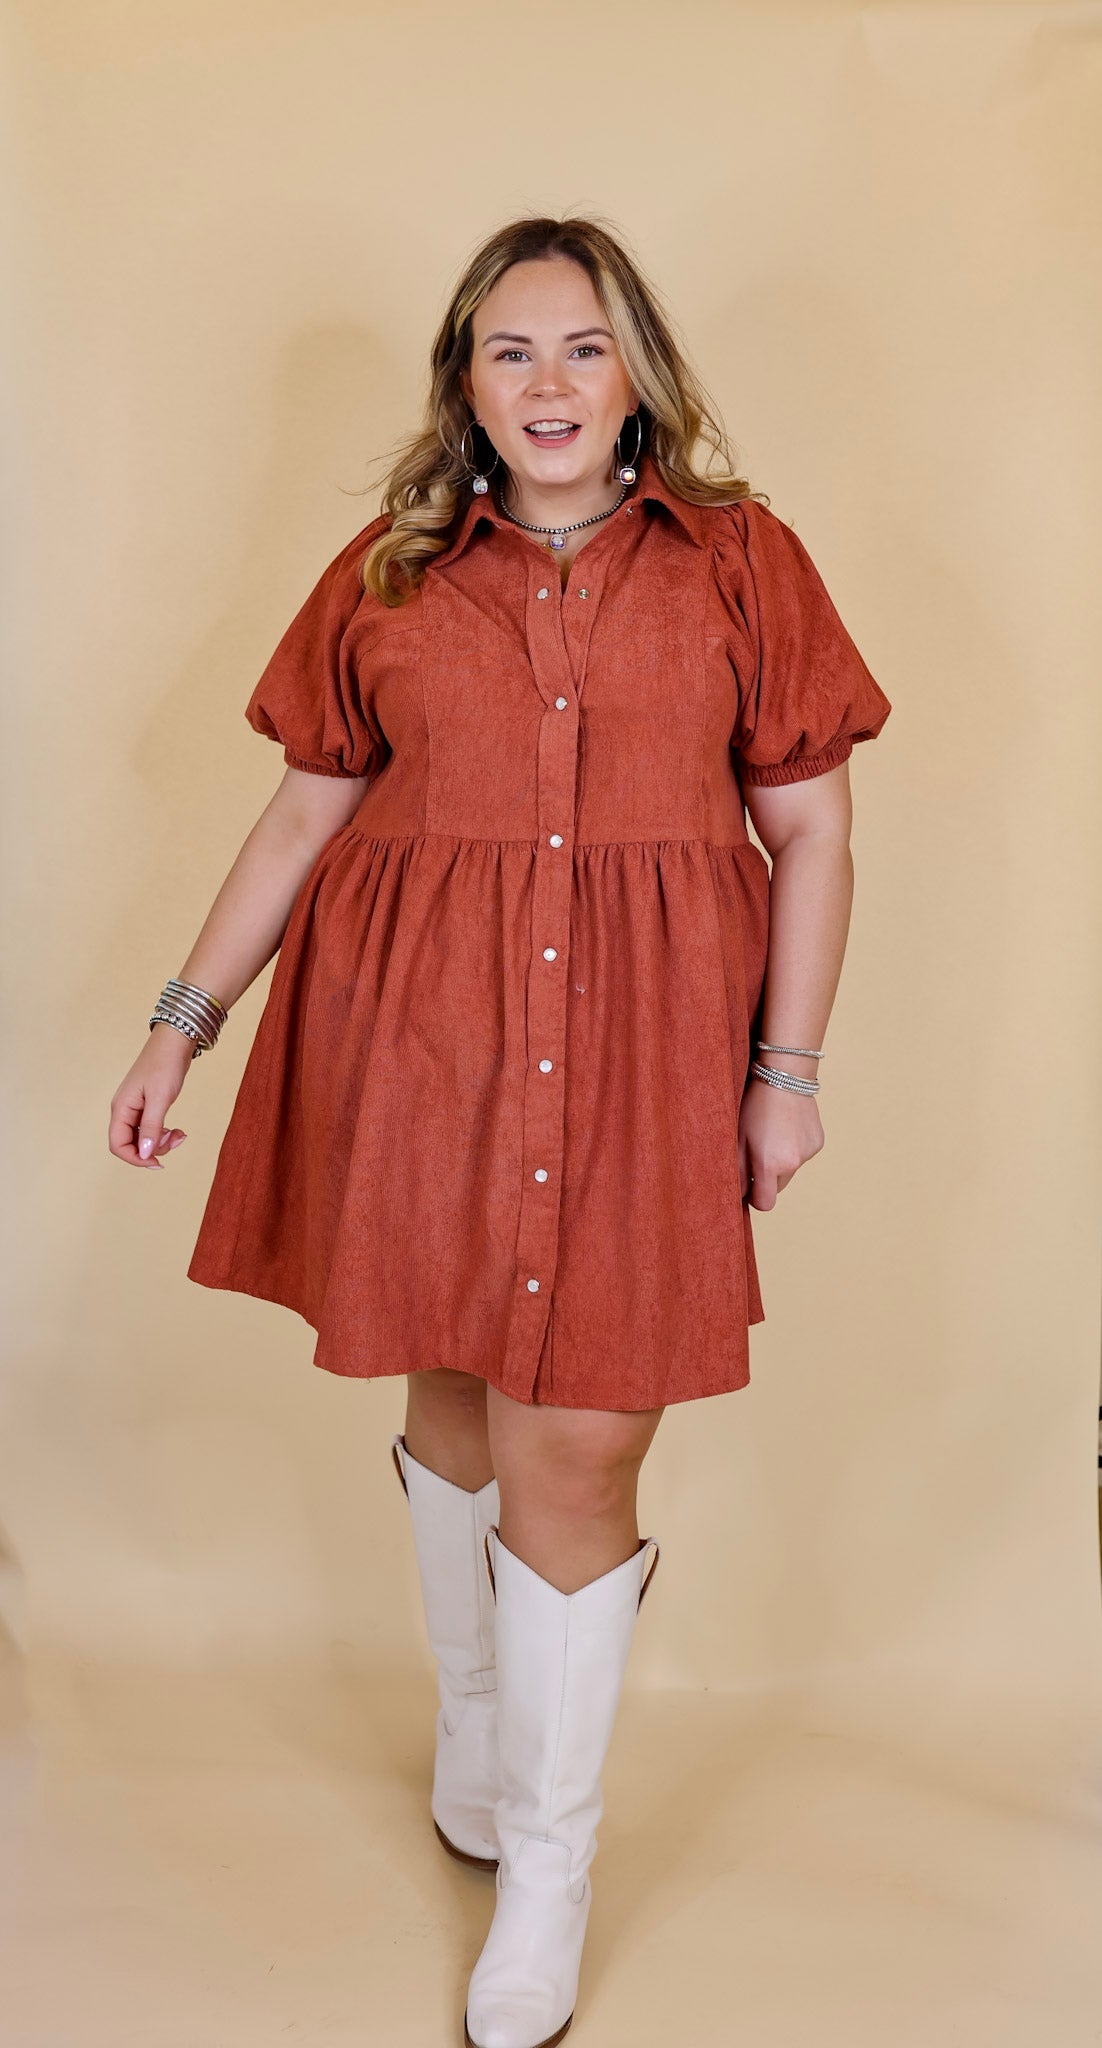 Adventures Ahead Button Up Corduroy Babydoll Dress in Terracotta - Giddy Up Glamour Boutique